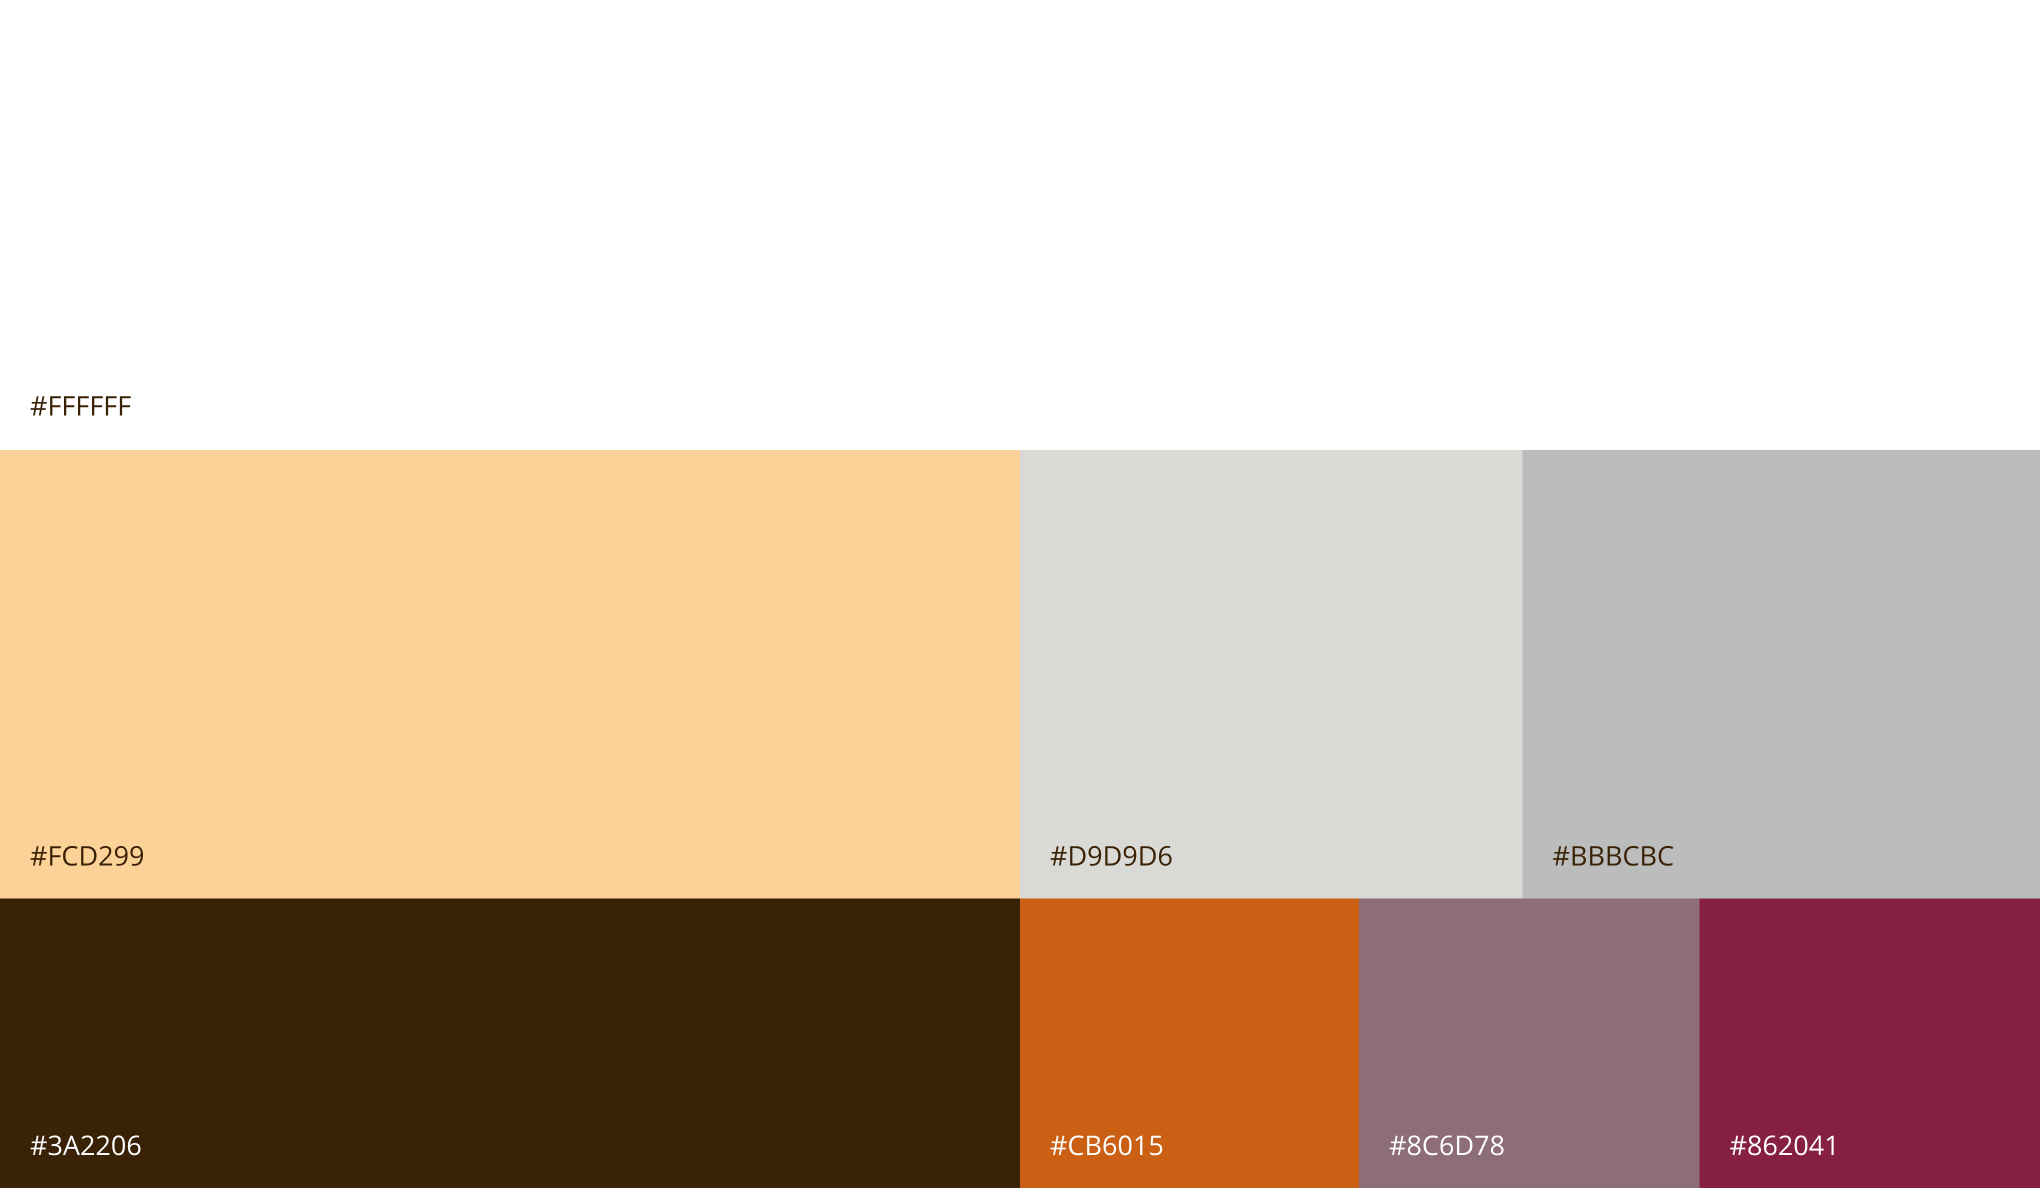 JPM_IMG_Final_ColorPalette